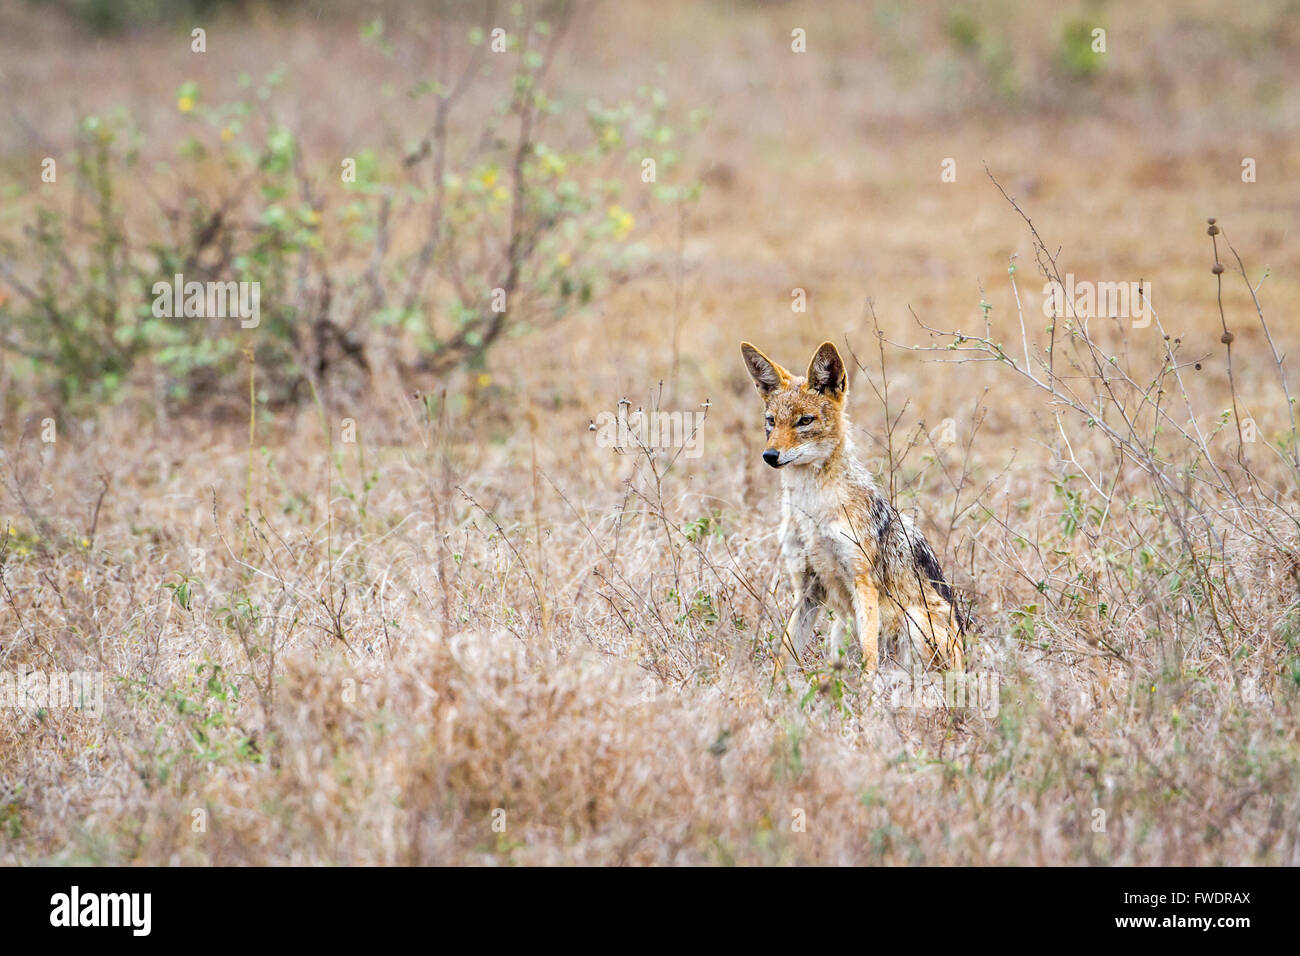 Black-backed jackal in Kruger national park, South Africa  ; Specie Canis mesomelas family of canidae Stock Photo